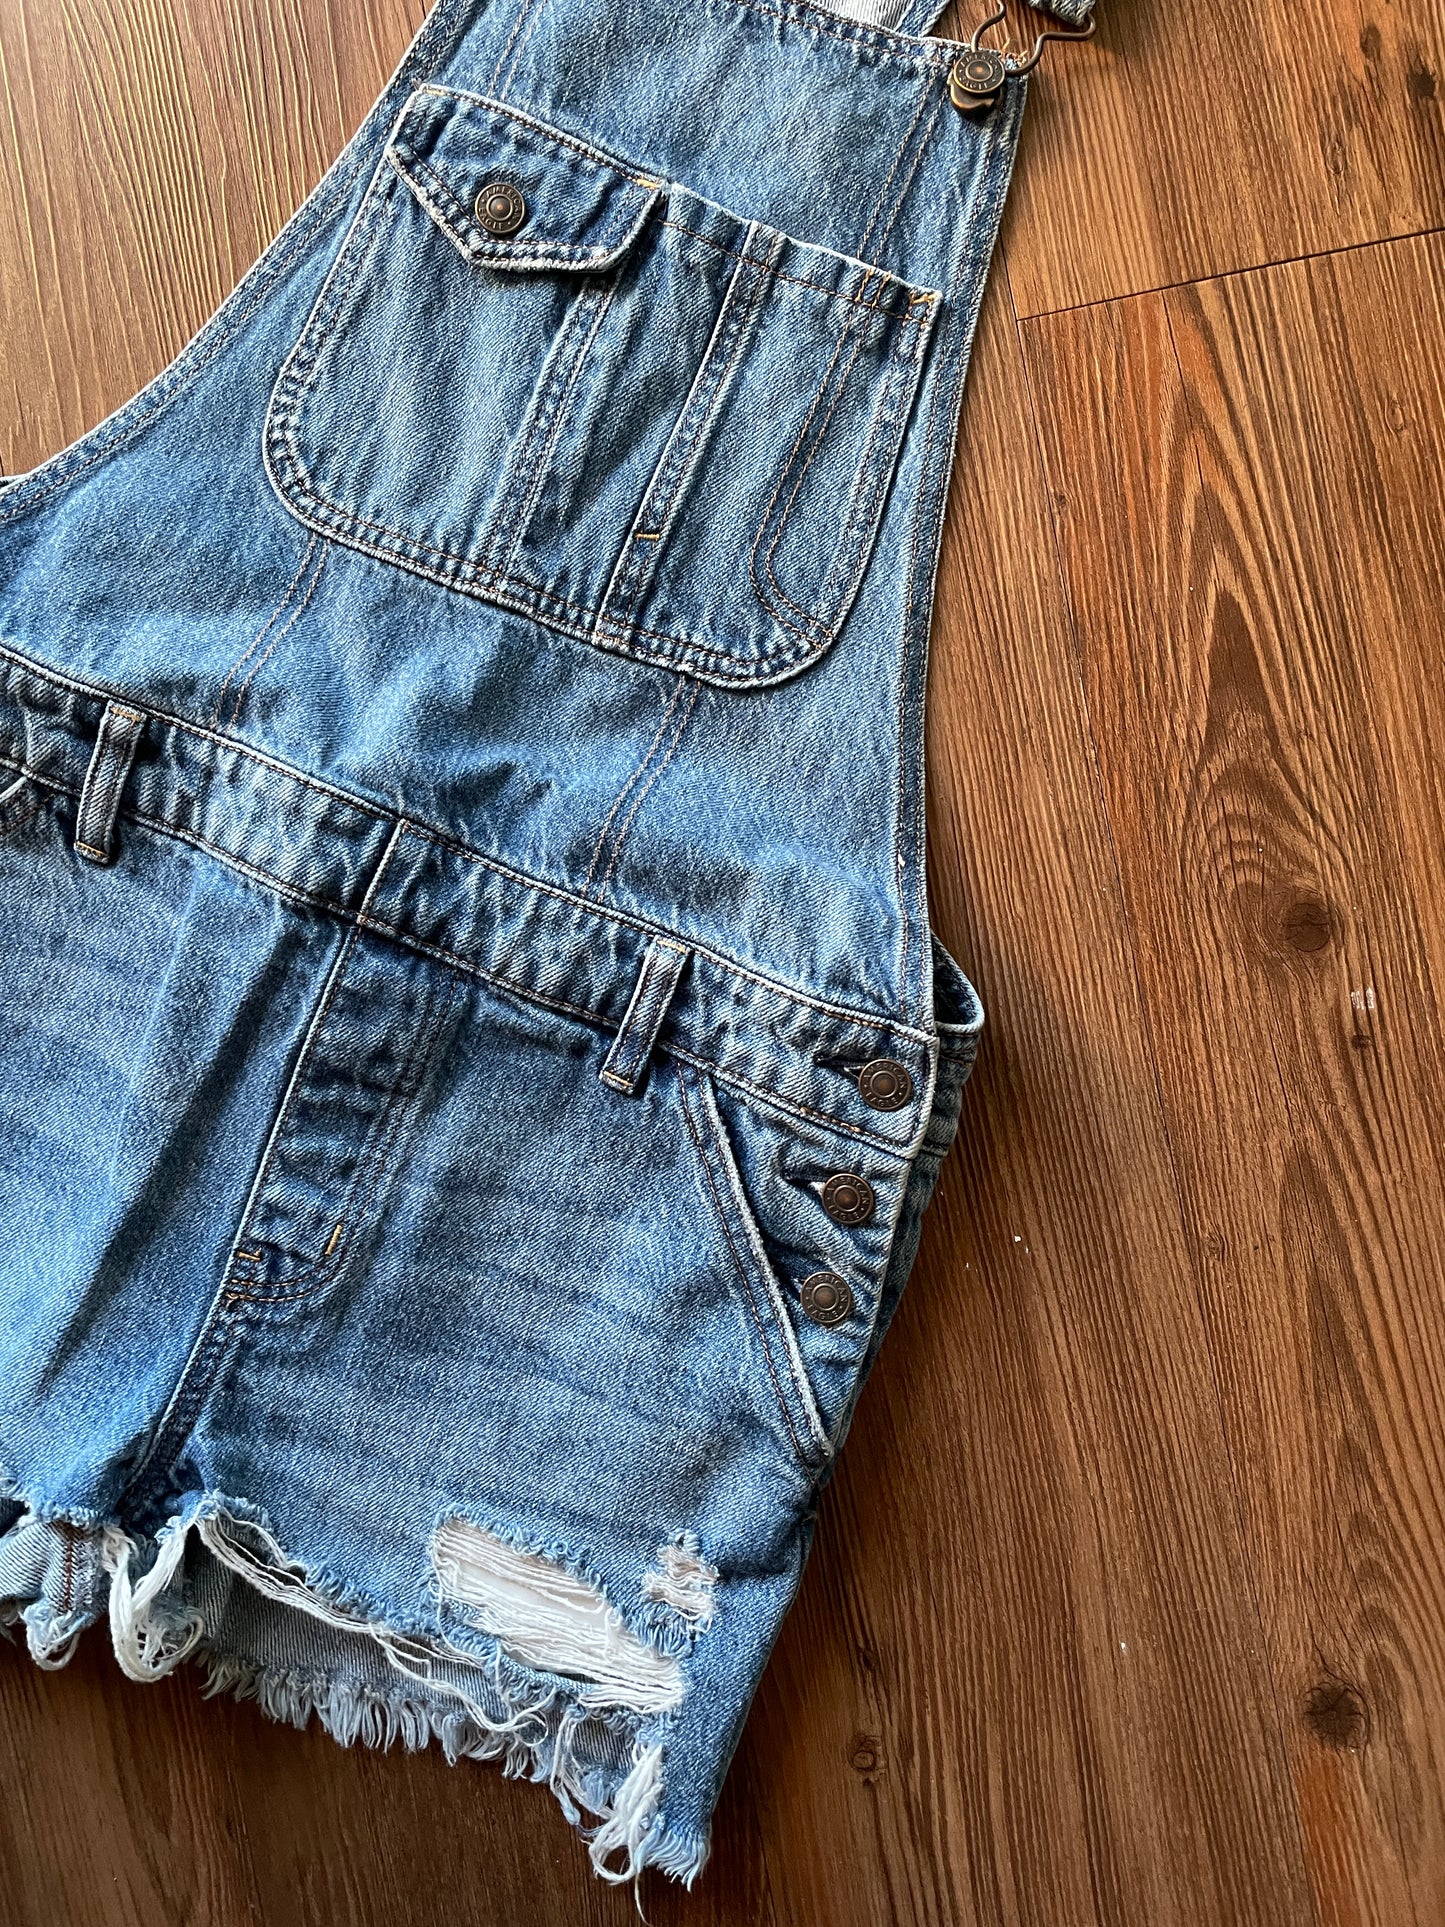 Women’s Small American Eagle Denim Tomgirl Overall Shorts